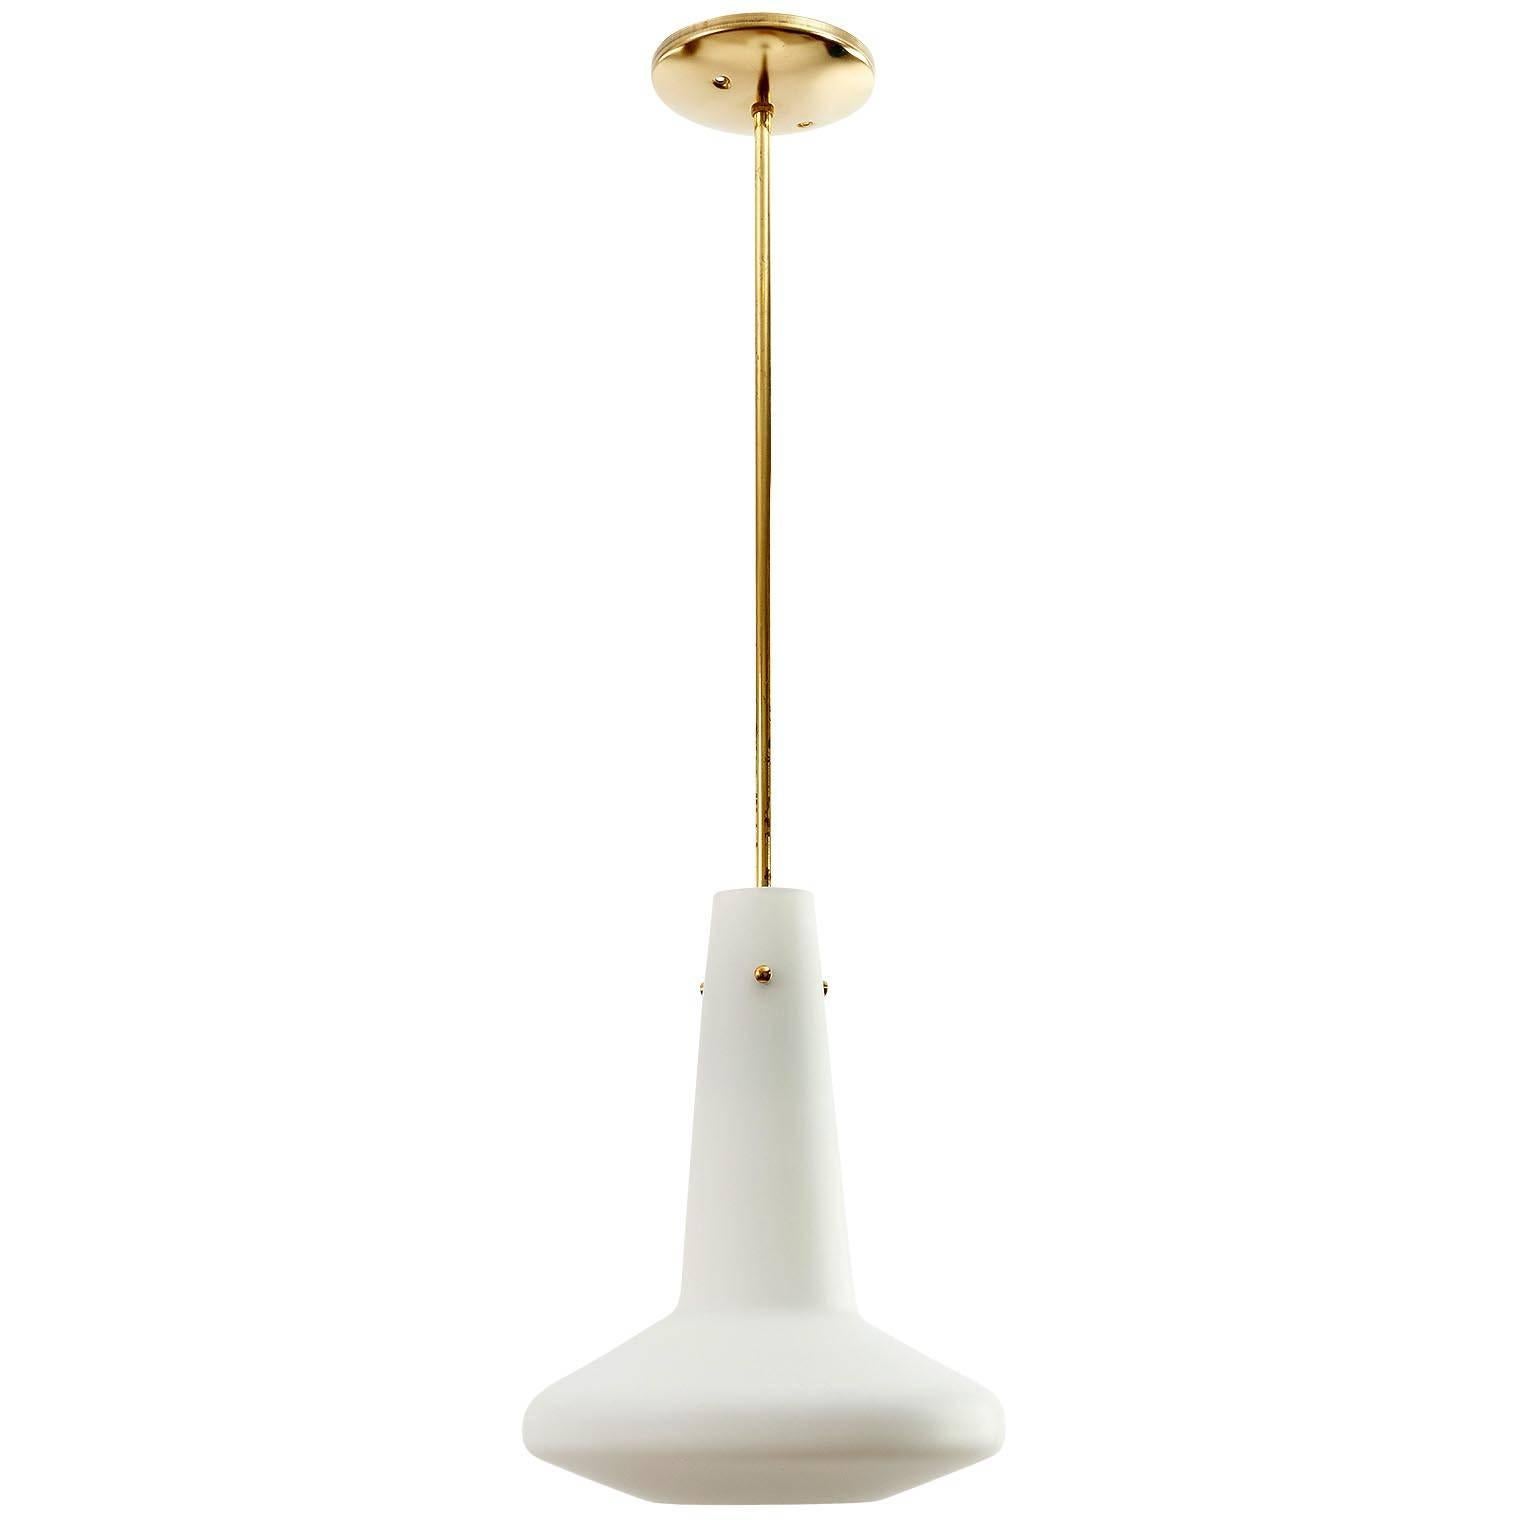 A pair (set of two) pendant light fixtures by Rupert Nikoll, Austria, manufactured in Mid-Century, circa 1960 (late 1950s or early 1960s). The lights are in the style of Italian maker Stilnovo.
A white opaline glass body is mounted on a brass stem